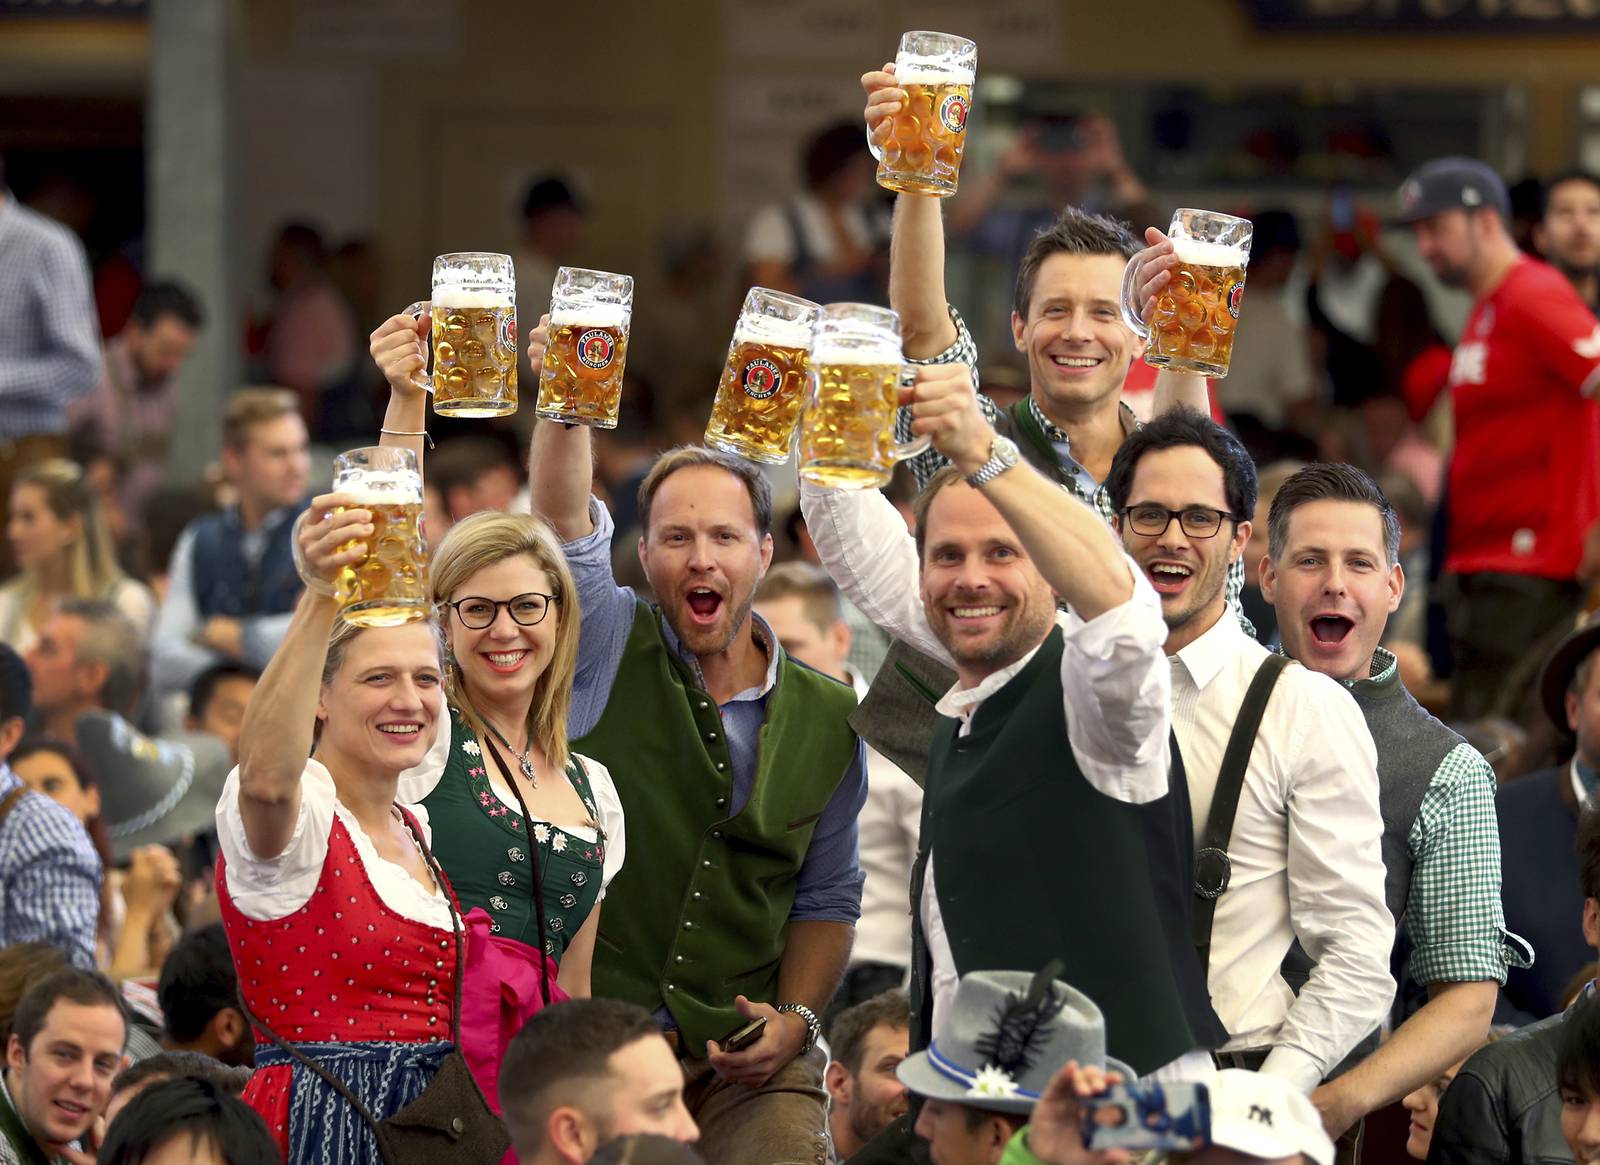 oktoberfest-not-everyone-is-happy-behind-the-smiles-and-the-beer-the